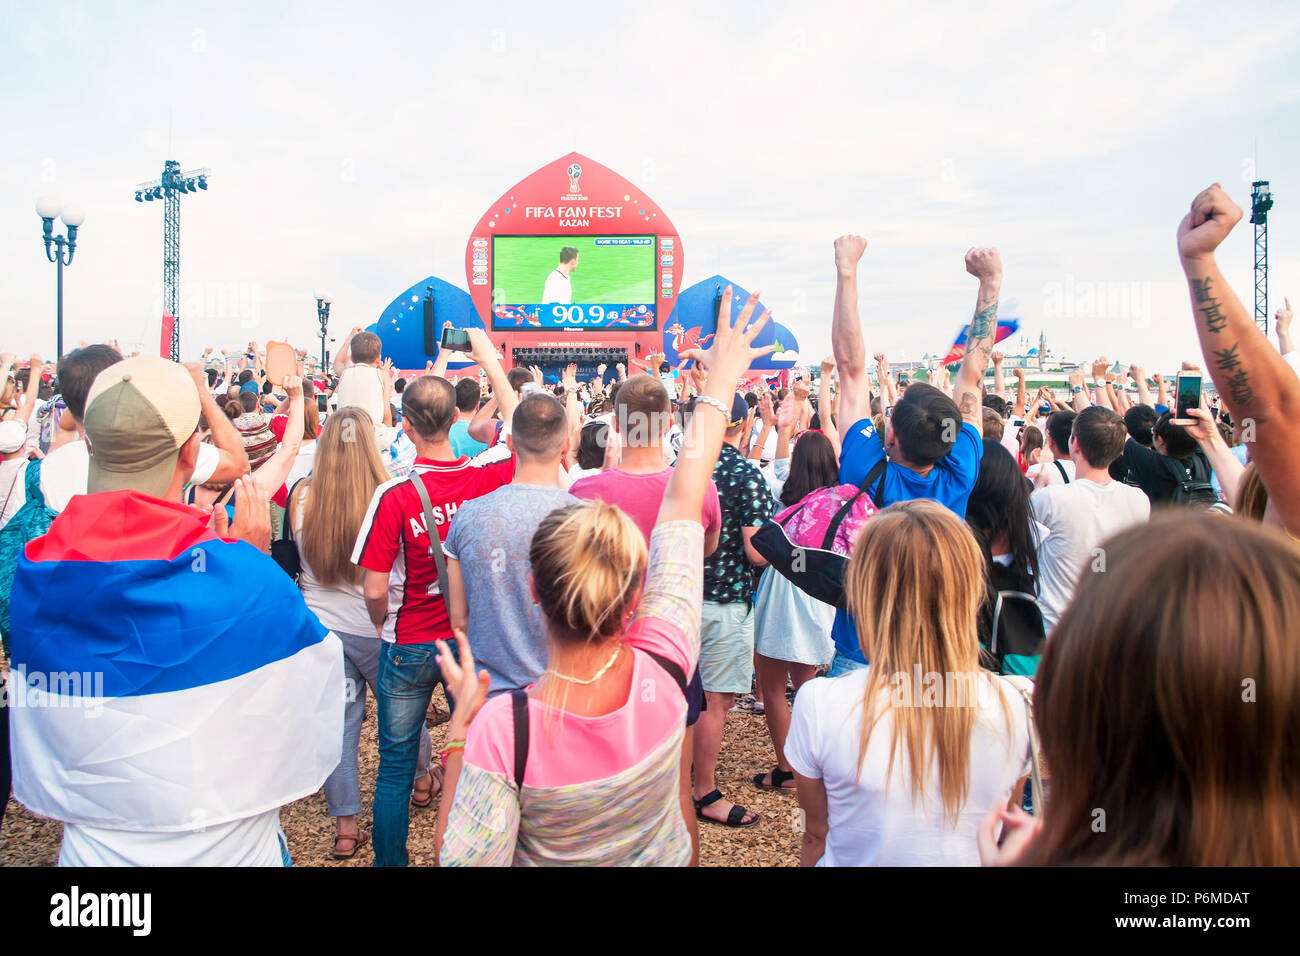 KAZAN, RUSSIA - 1 JULY, 2018: Russia football fans cheering at Kazan Fan Fest Zone after Russia's victory in Spain vs Russia match. Credit: Aygul Sarvarova/Alamy Live News Stock Photo